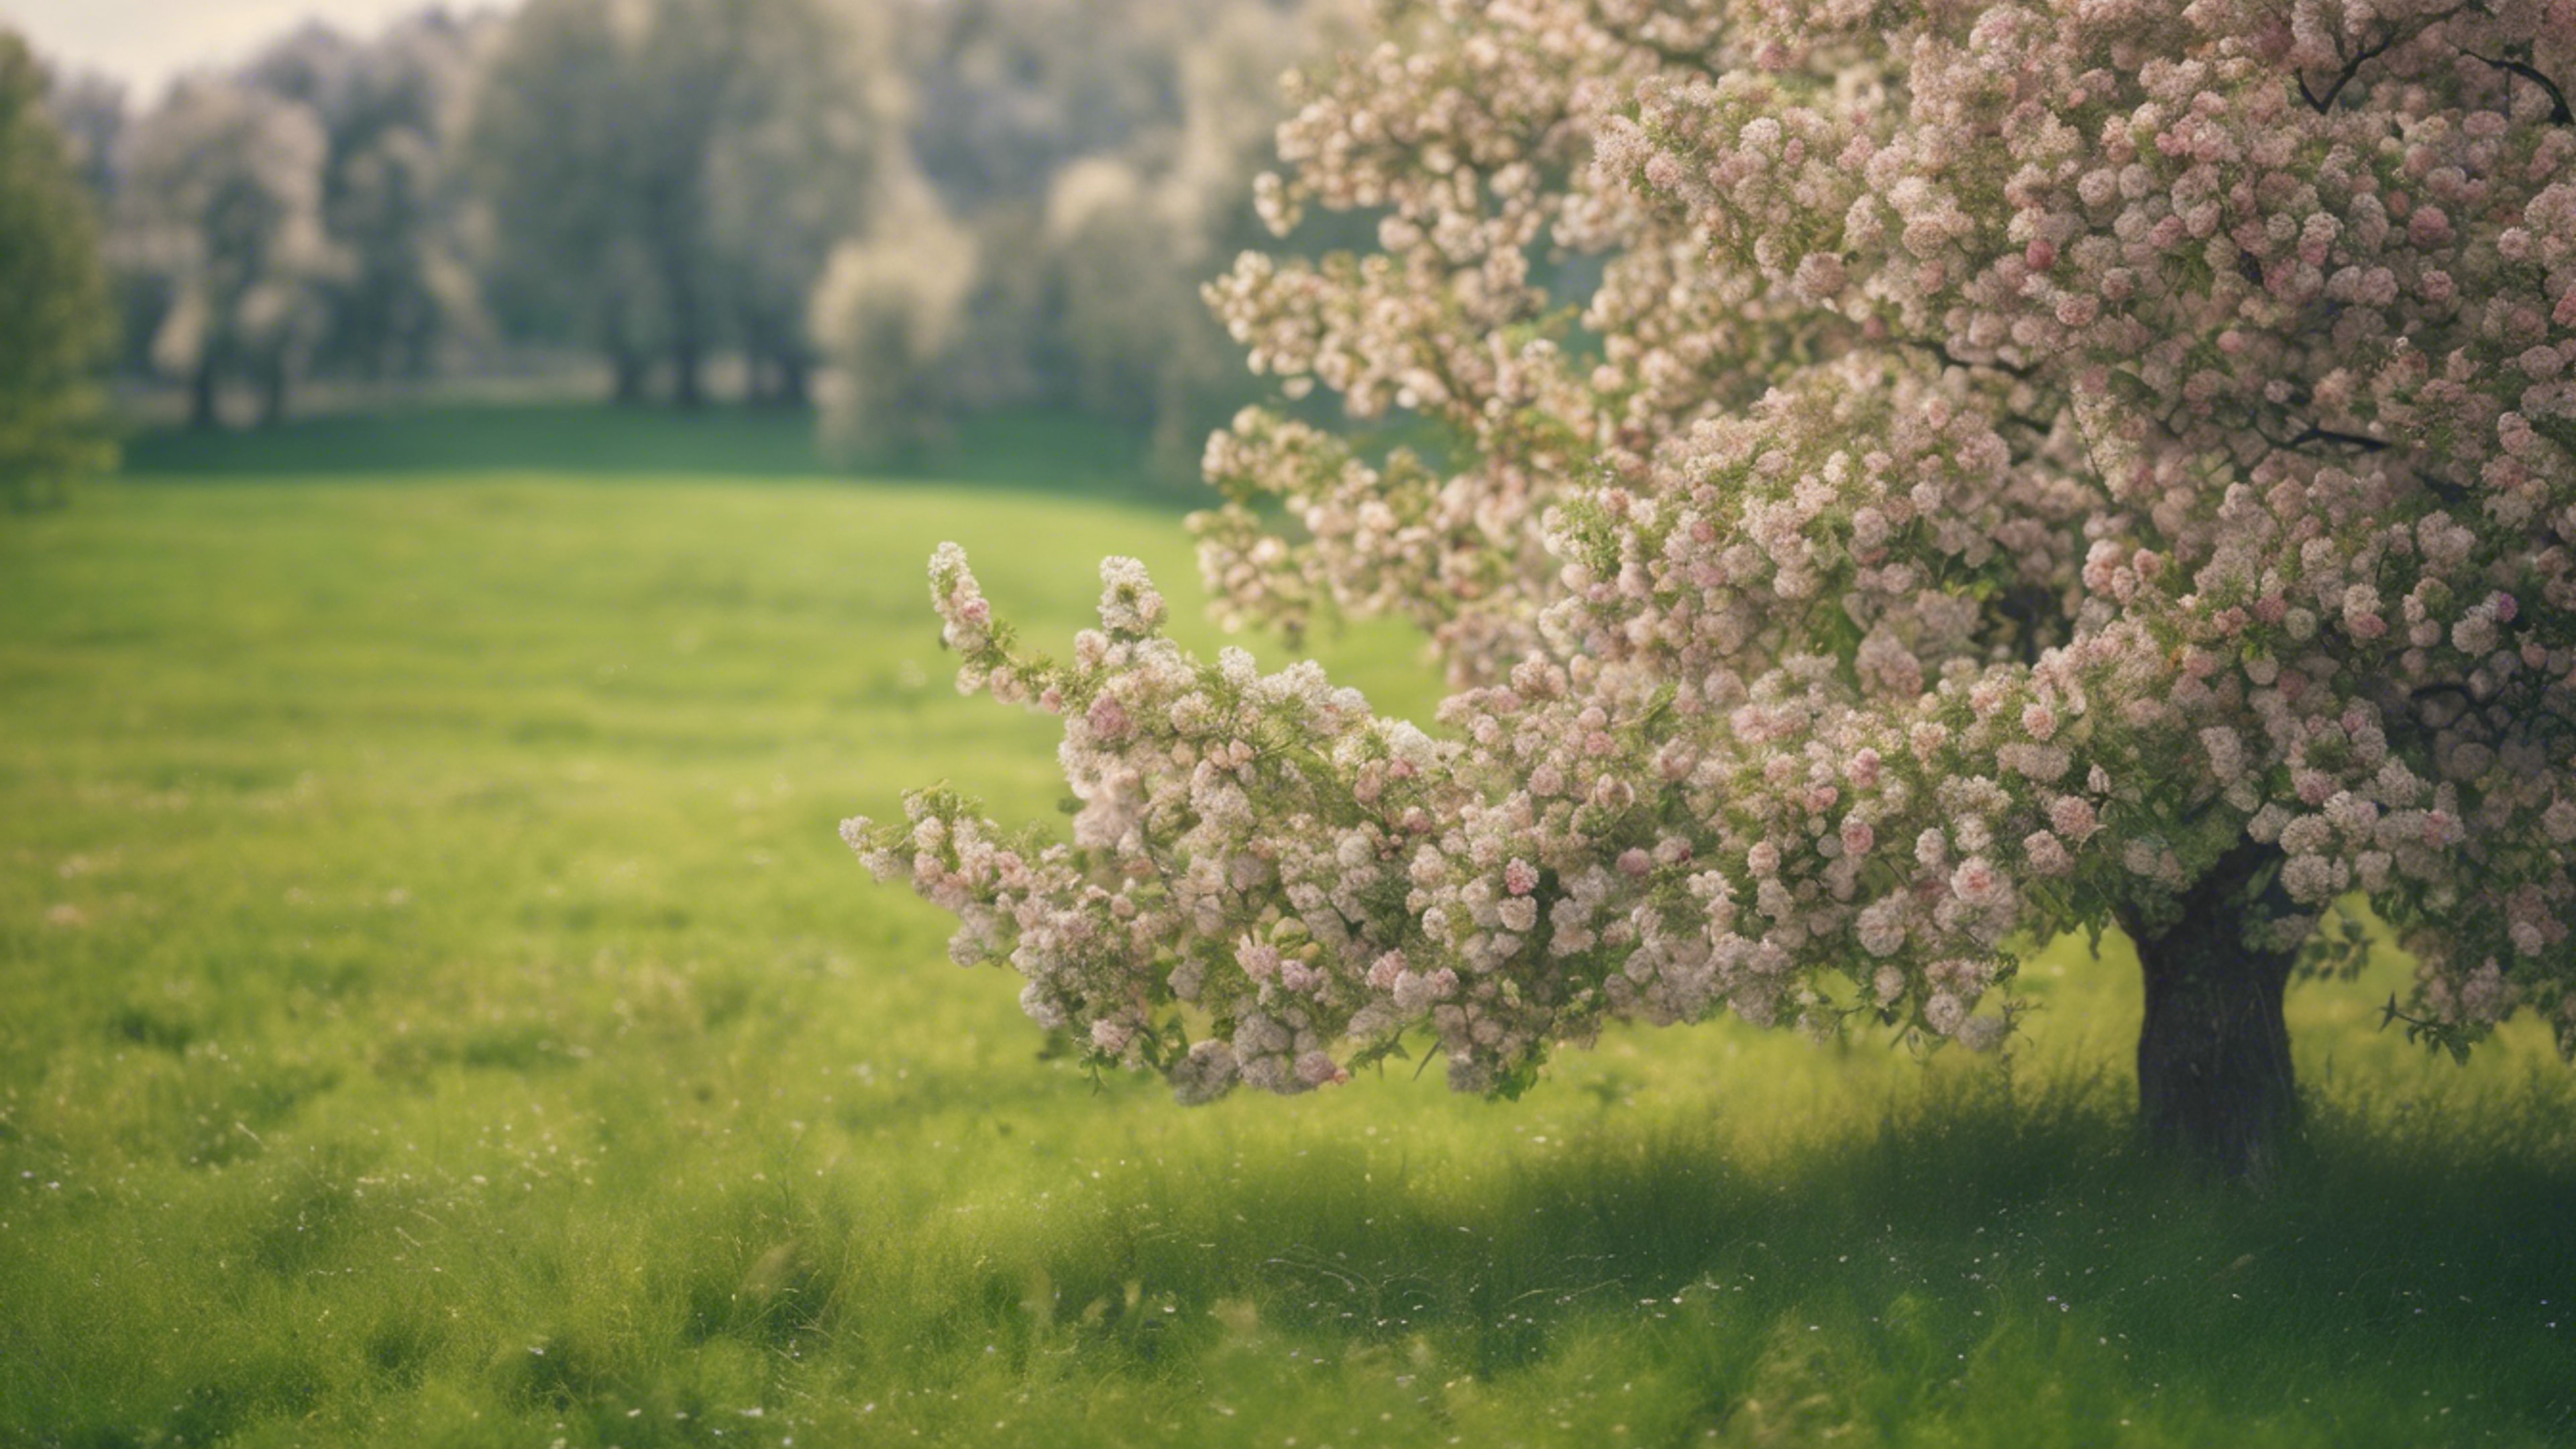 A flowering apple tree standing alone in a green, soft-focused meadow. Шпалери[1ff1aa7d7c75473a9031]